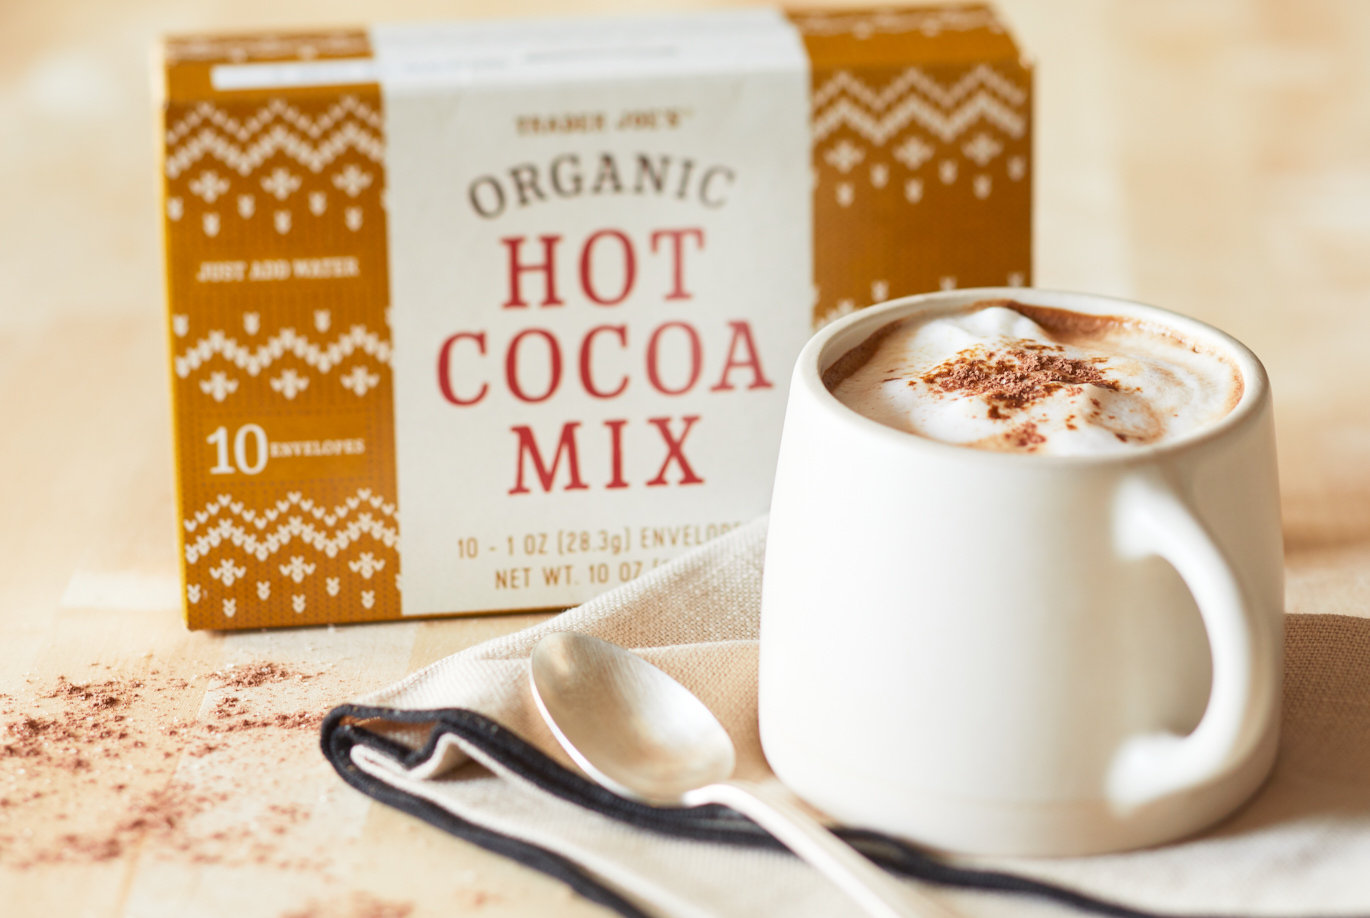 Trader Joe's Organic Hot Cocoa Mix; prepared in a white mug, with more cooca powder sprinkled on top and on surface